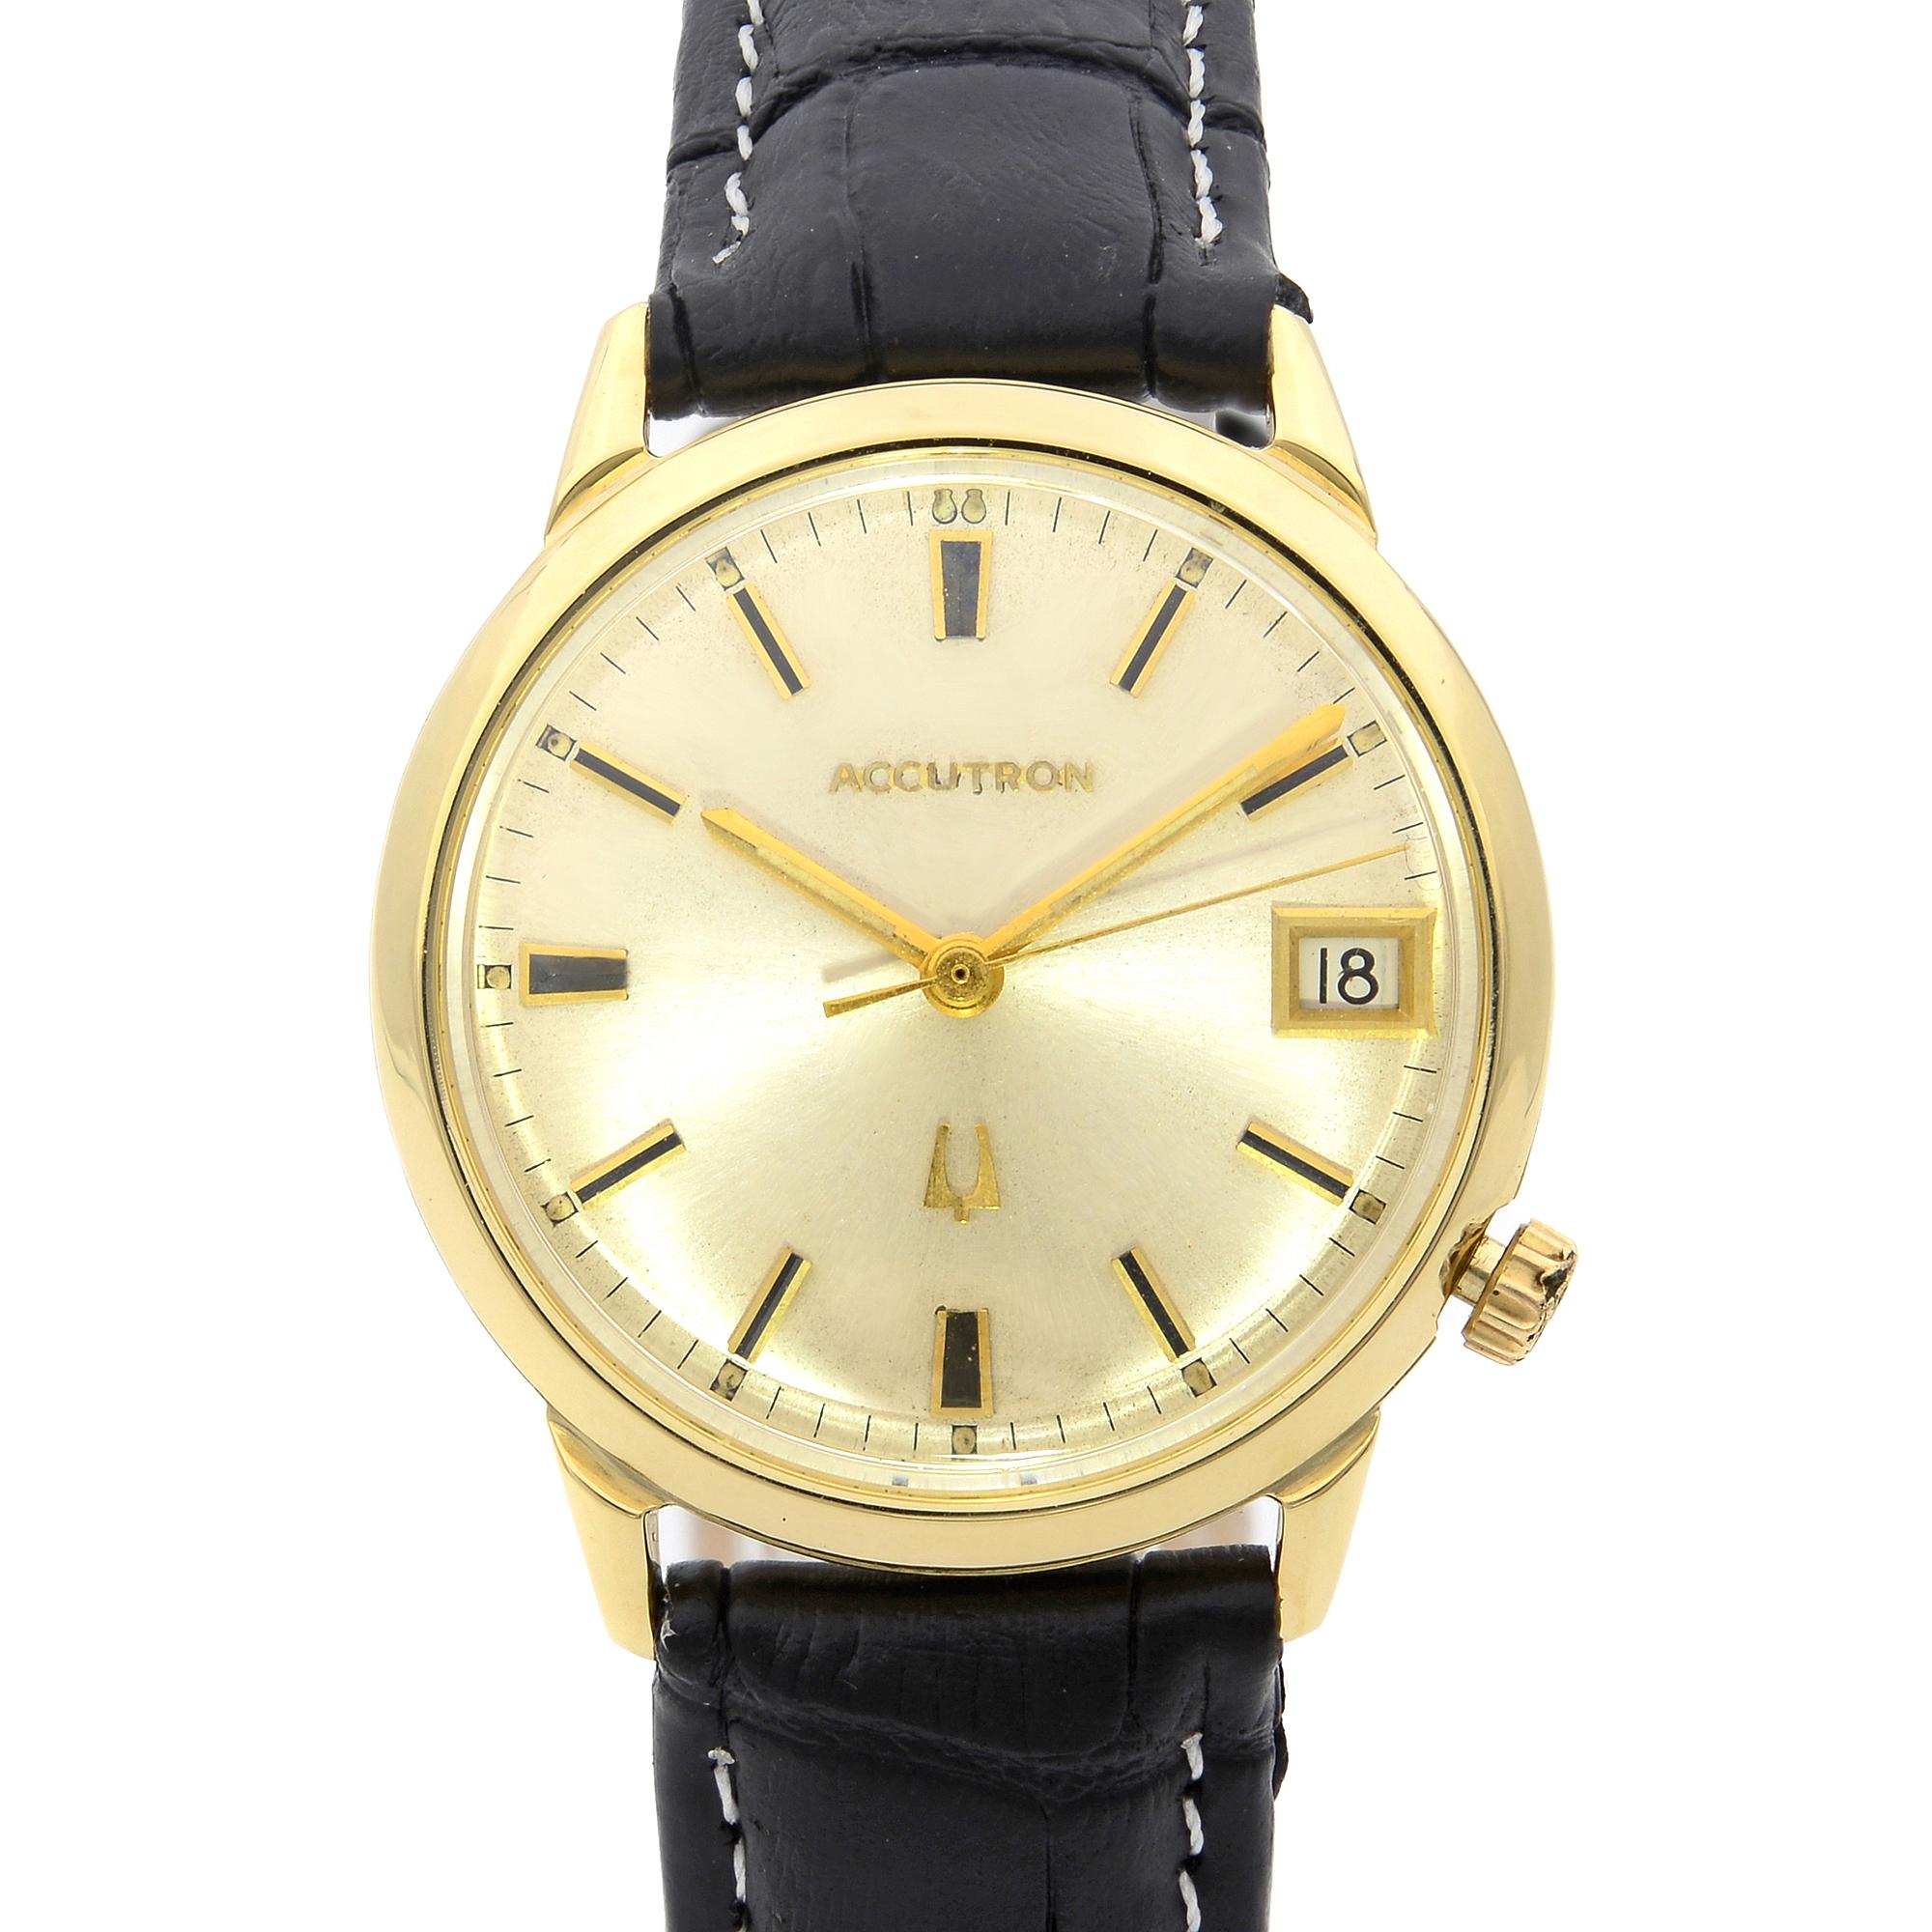 This pre-owned Bulova  NA is a beautiful men's timepiece that is powered by quartz (battery) movement which is cased in a yellow gold case. It has a round shape face, date indicator dial, and has hand sticks style markers. It is completed with a